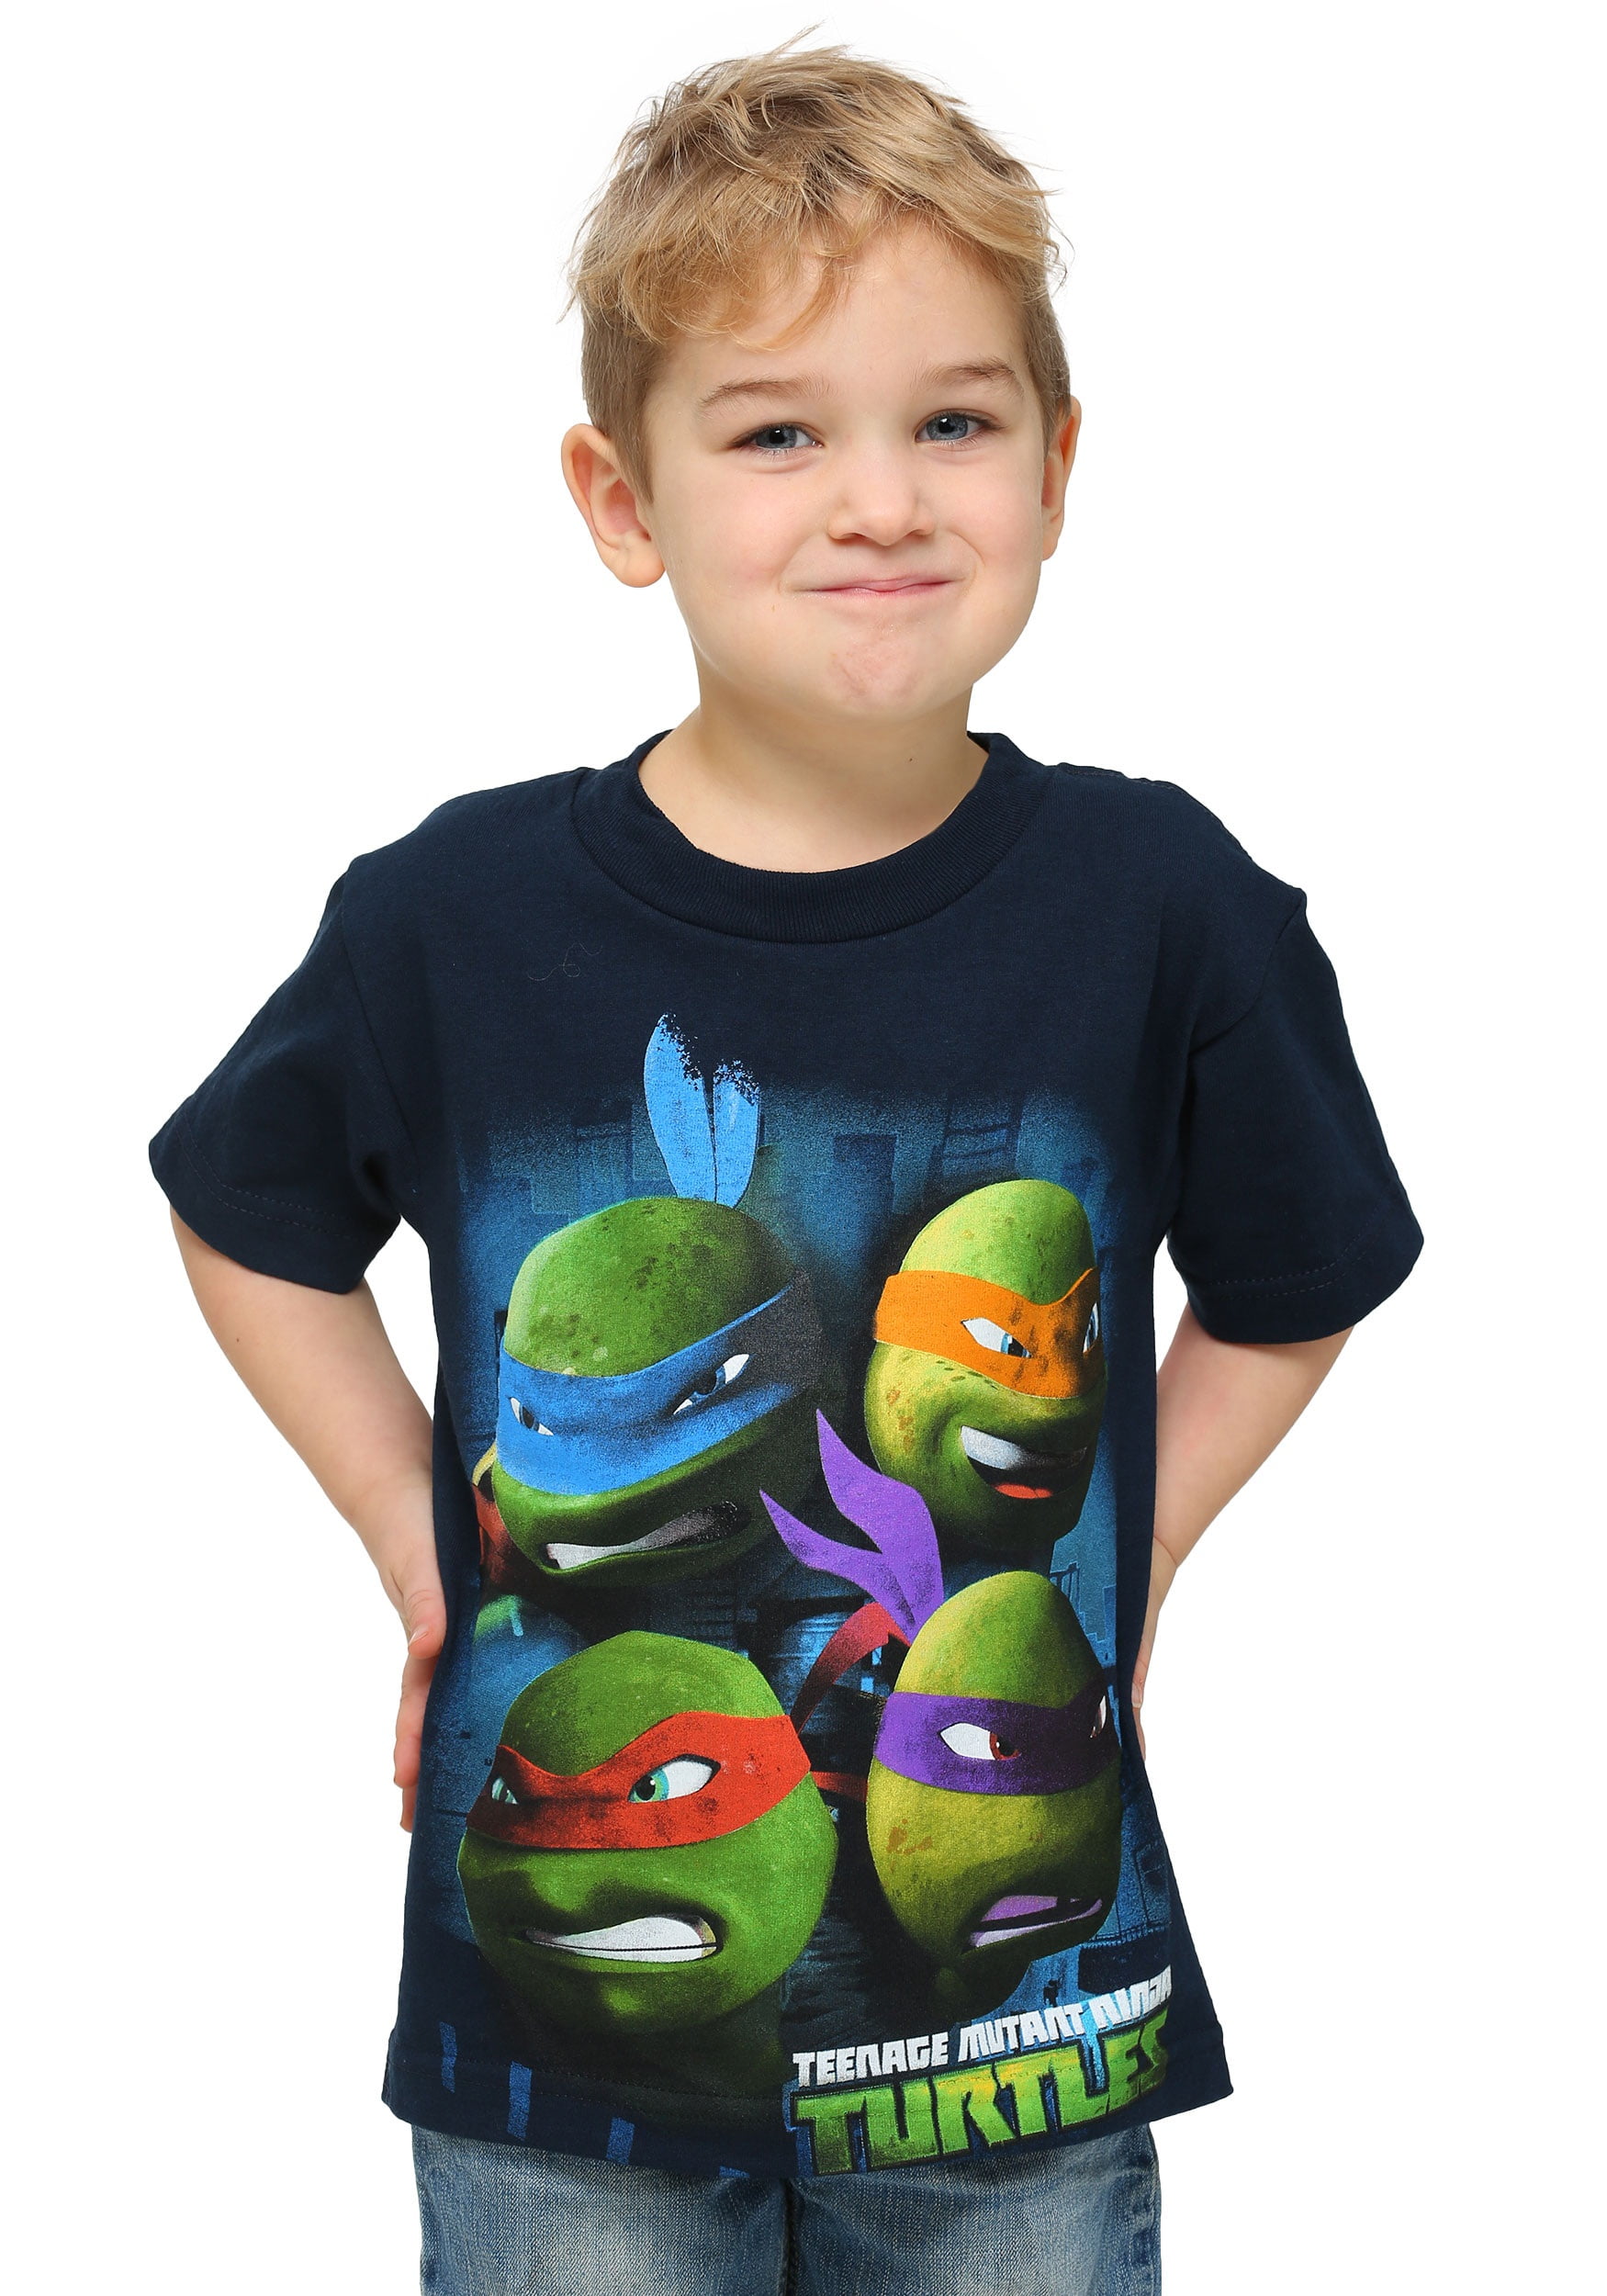 Boys Angry Bird T-shirt Different Styles Styles to choose from ages from 5-6 to 